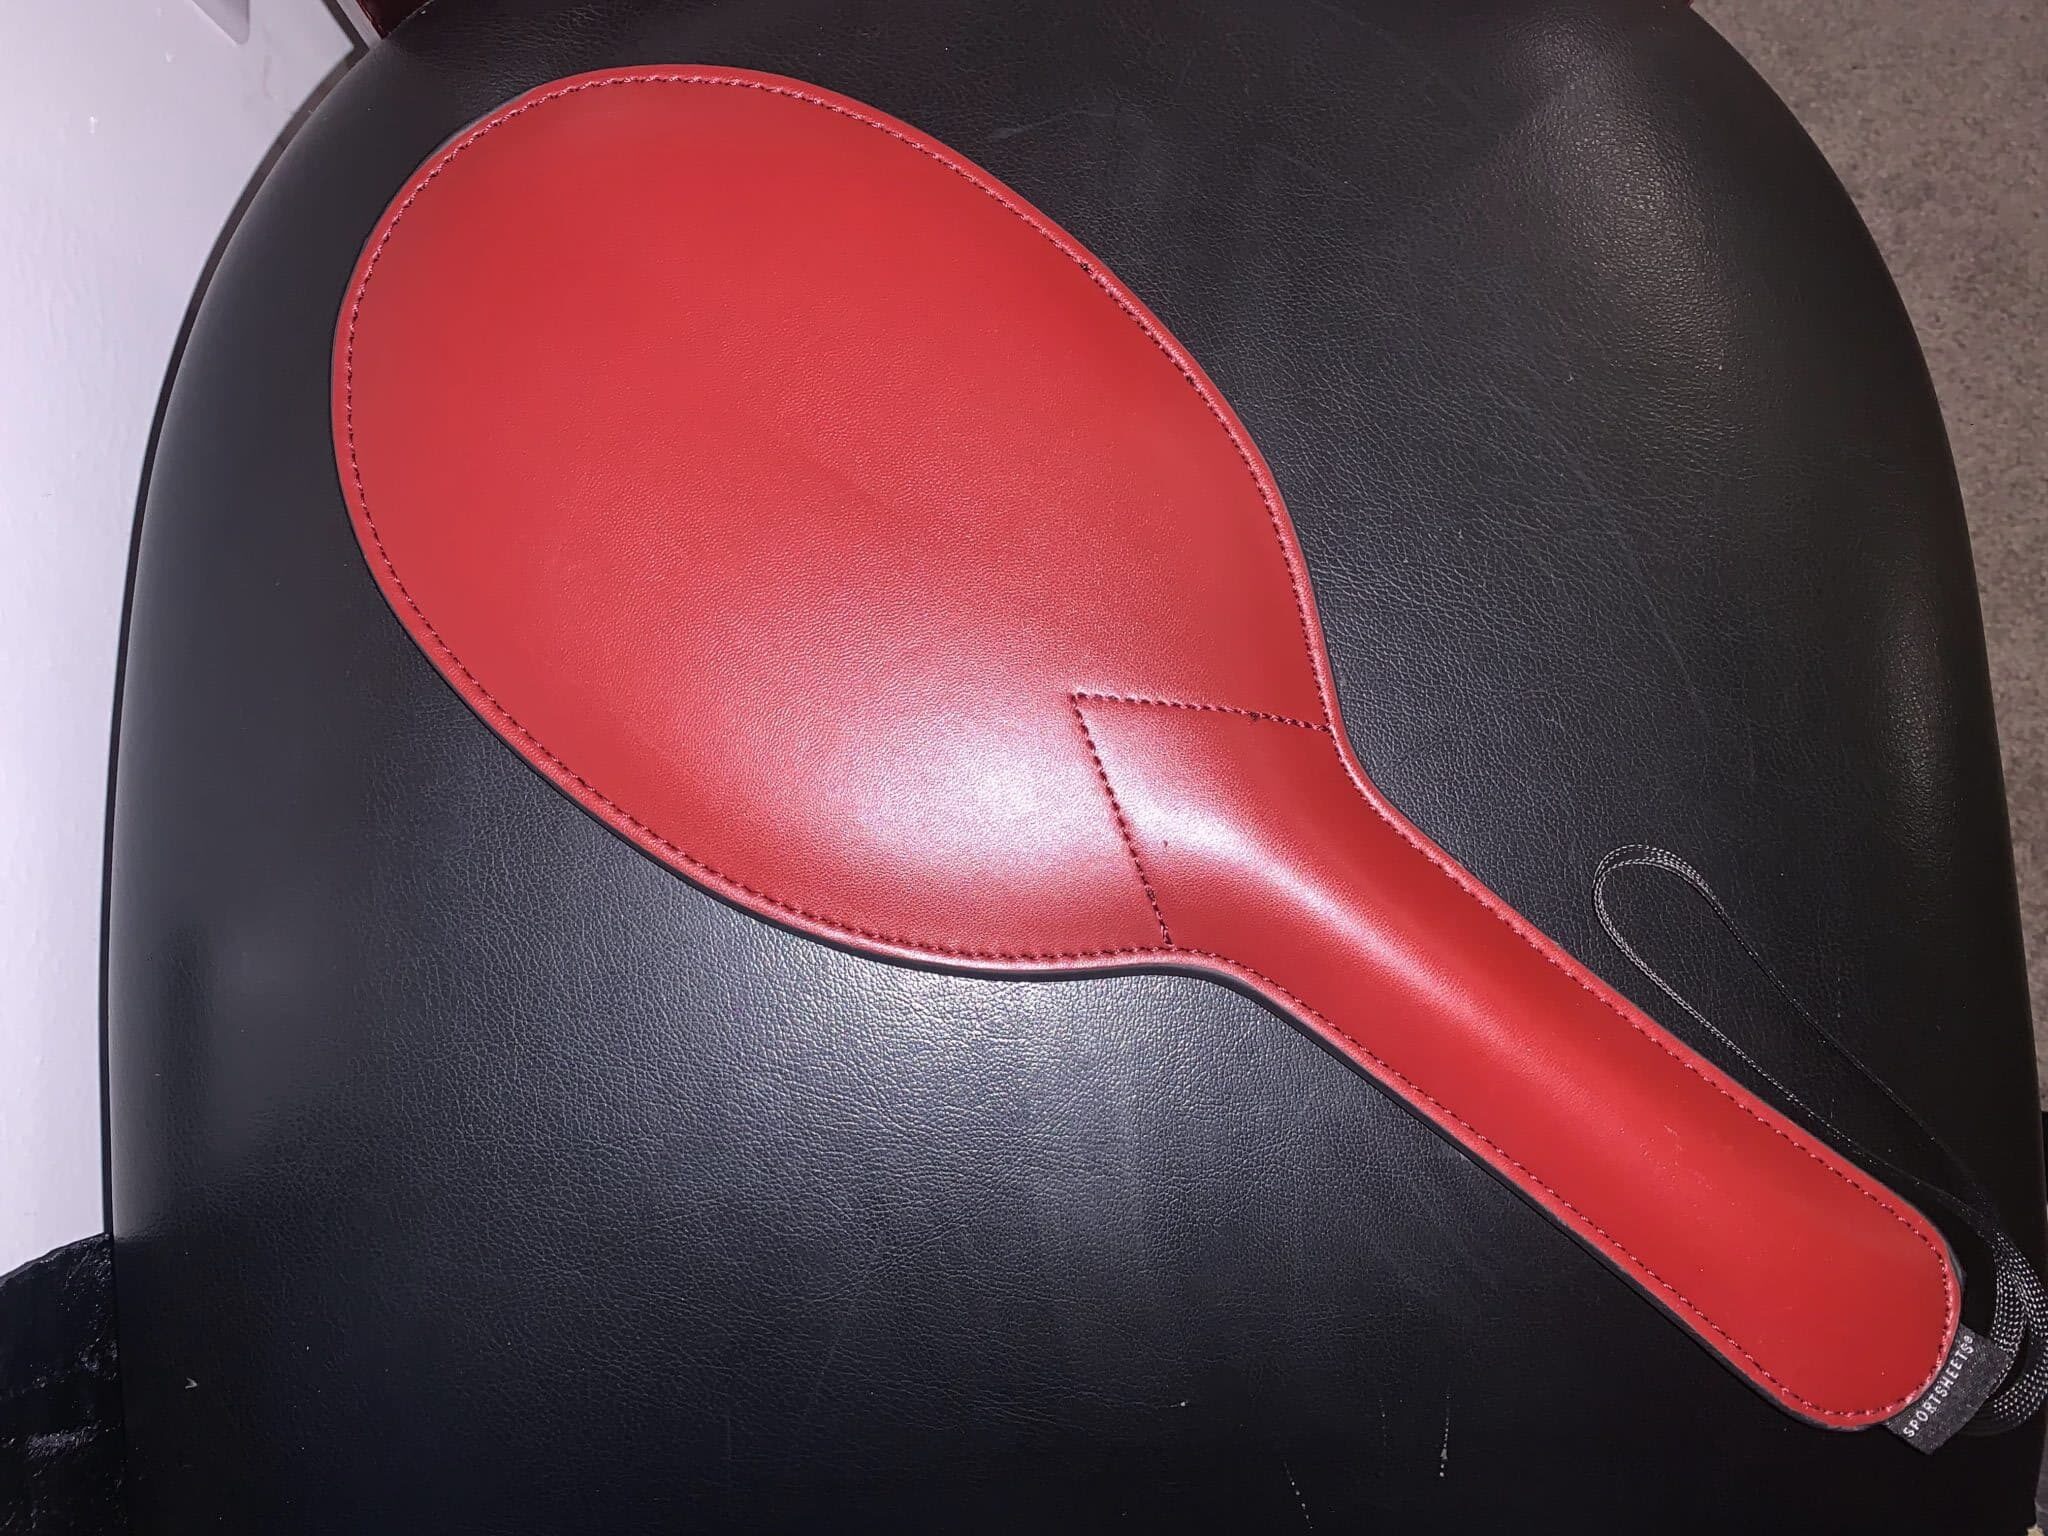 Sportsheets Saffron Ping Pong Paddle The Sportsheets Saffron Ping Pong Paddle: User Convenience Reviewed